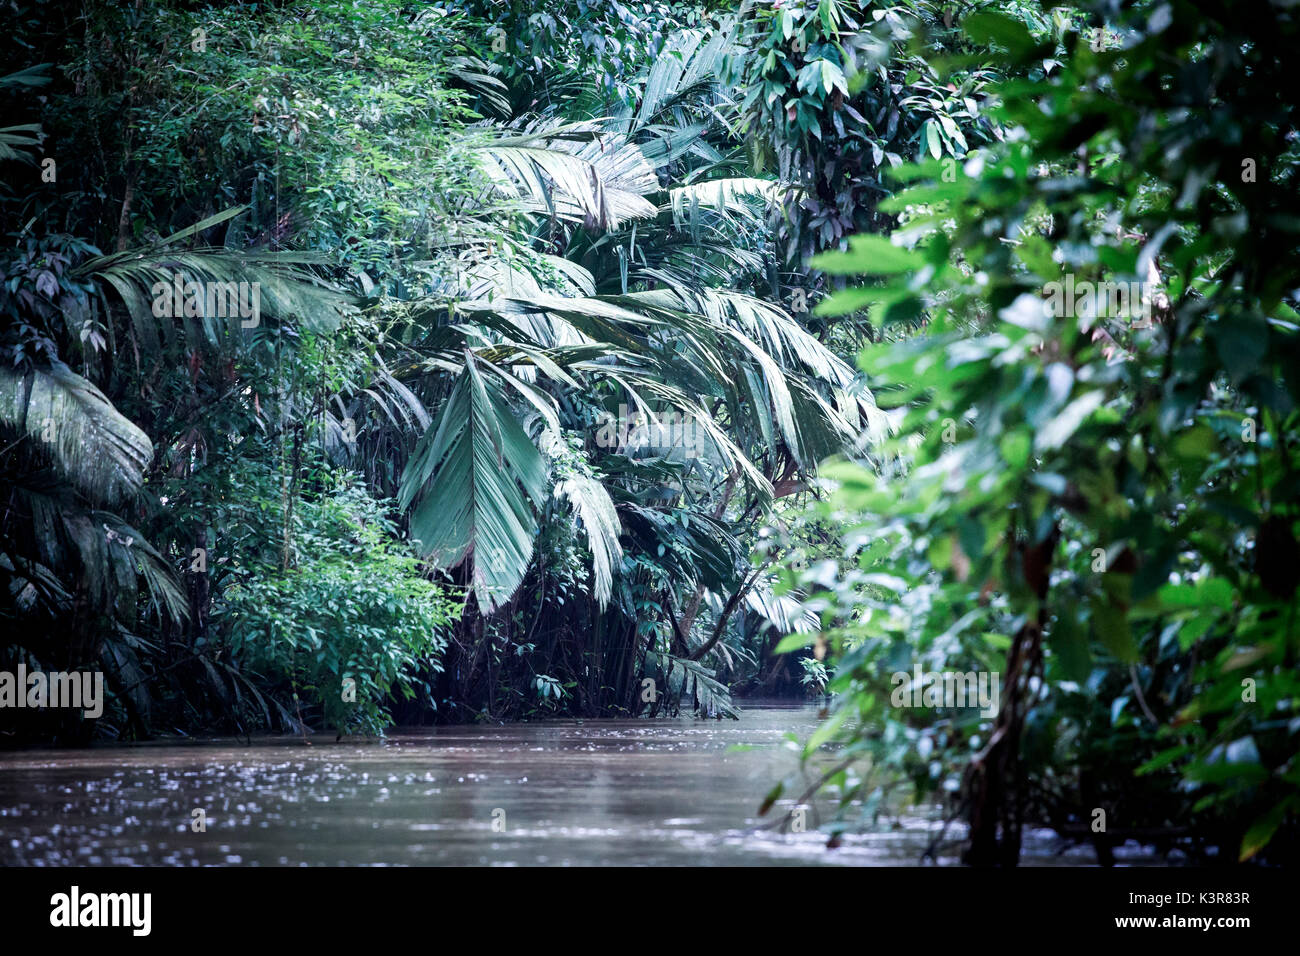 Tortuguero National Park, Costa Rica, view of the rainforest from a boat in the canals Stock Photo